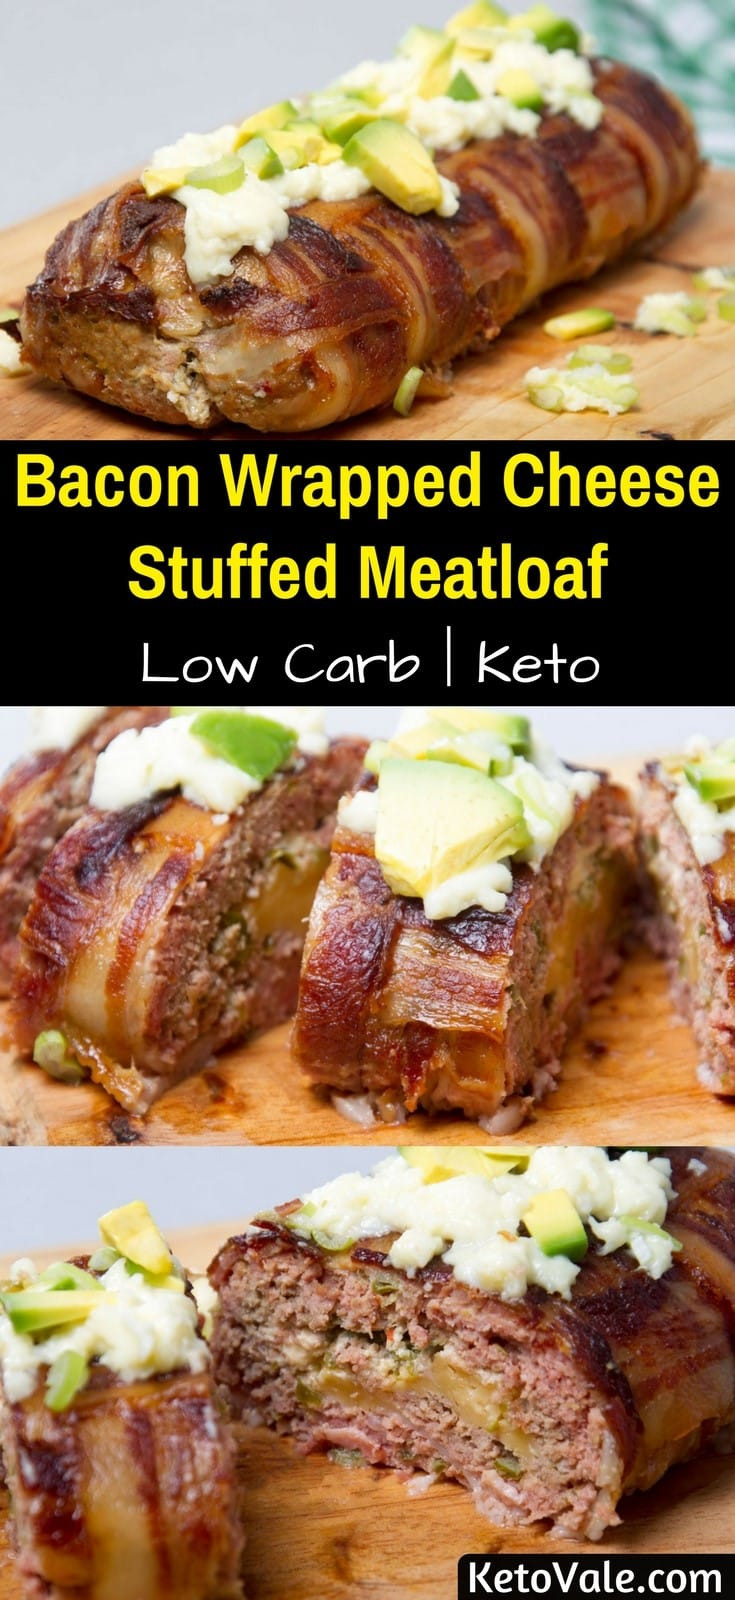 Low Carb Meatloaf With Cheese
 Bacon Wrapped Cheese Stuffed Meatloaf Low Carb Recipe